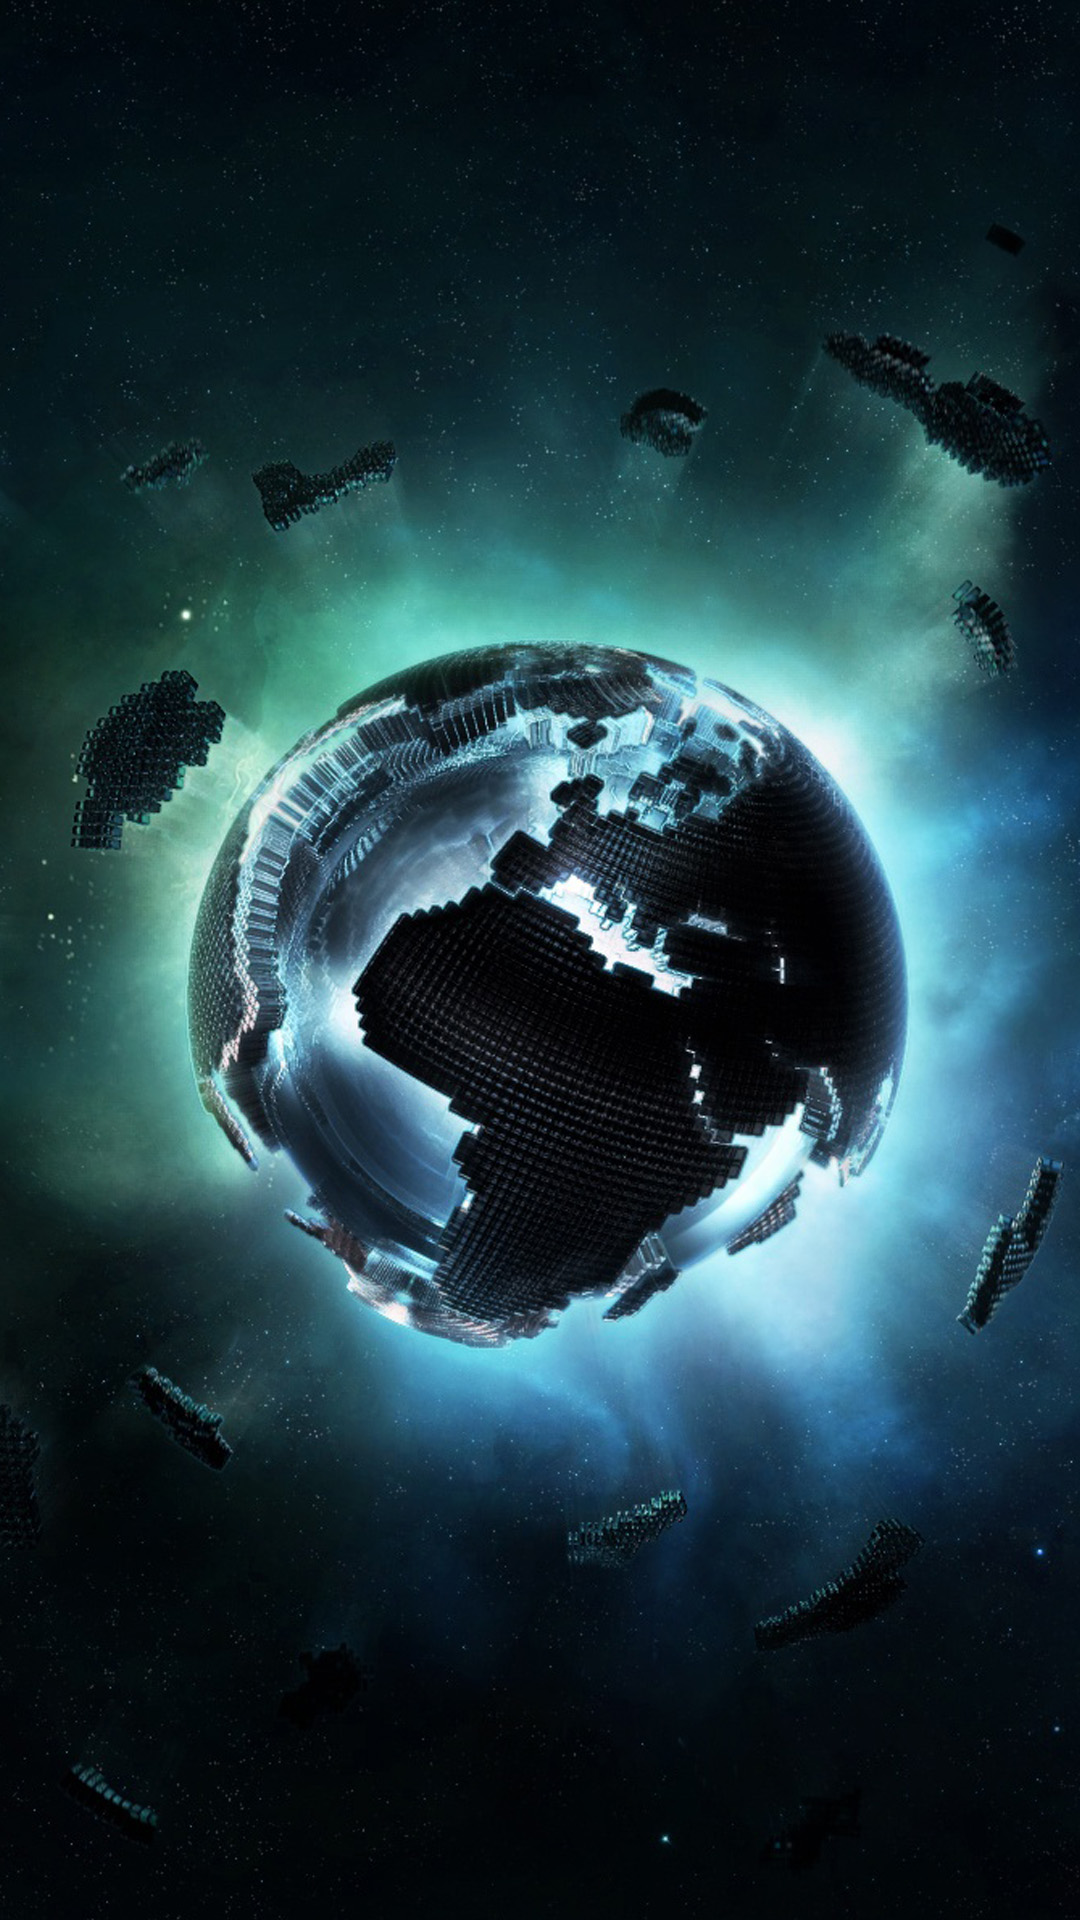 Galaxy S5 Pixel Earth Android Wallpaper free download